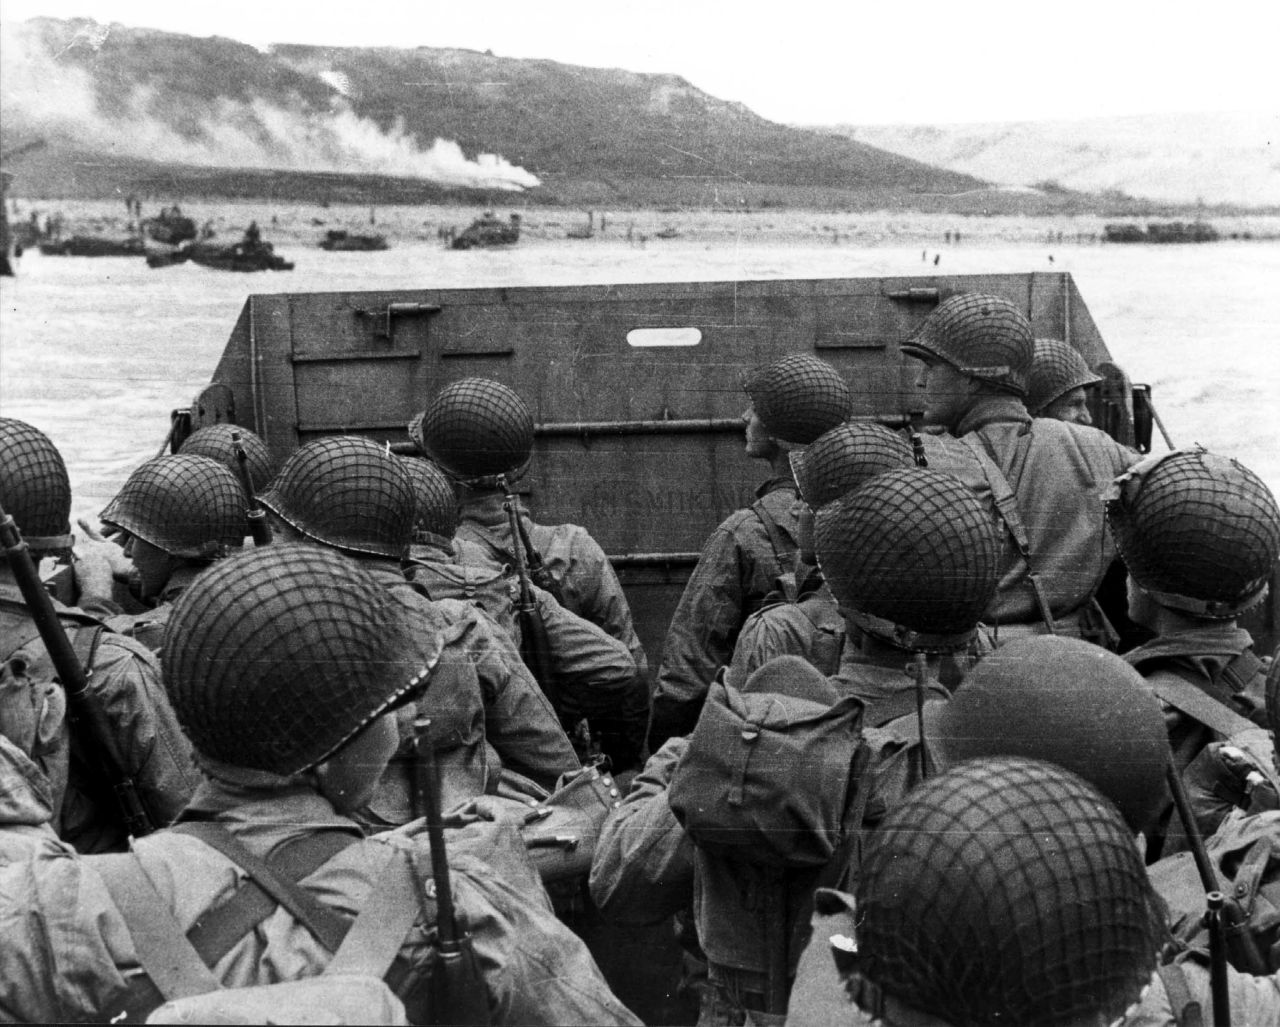 U.S. troops huddle behind the protective front of their landing craft as it nears a beachhead. Smoke in the background is naval gunfire, giving cover to troops on land.